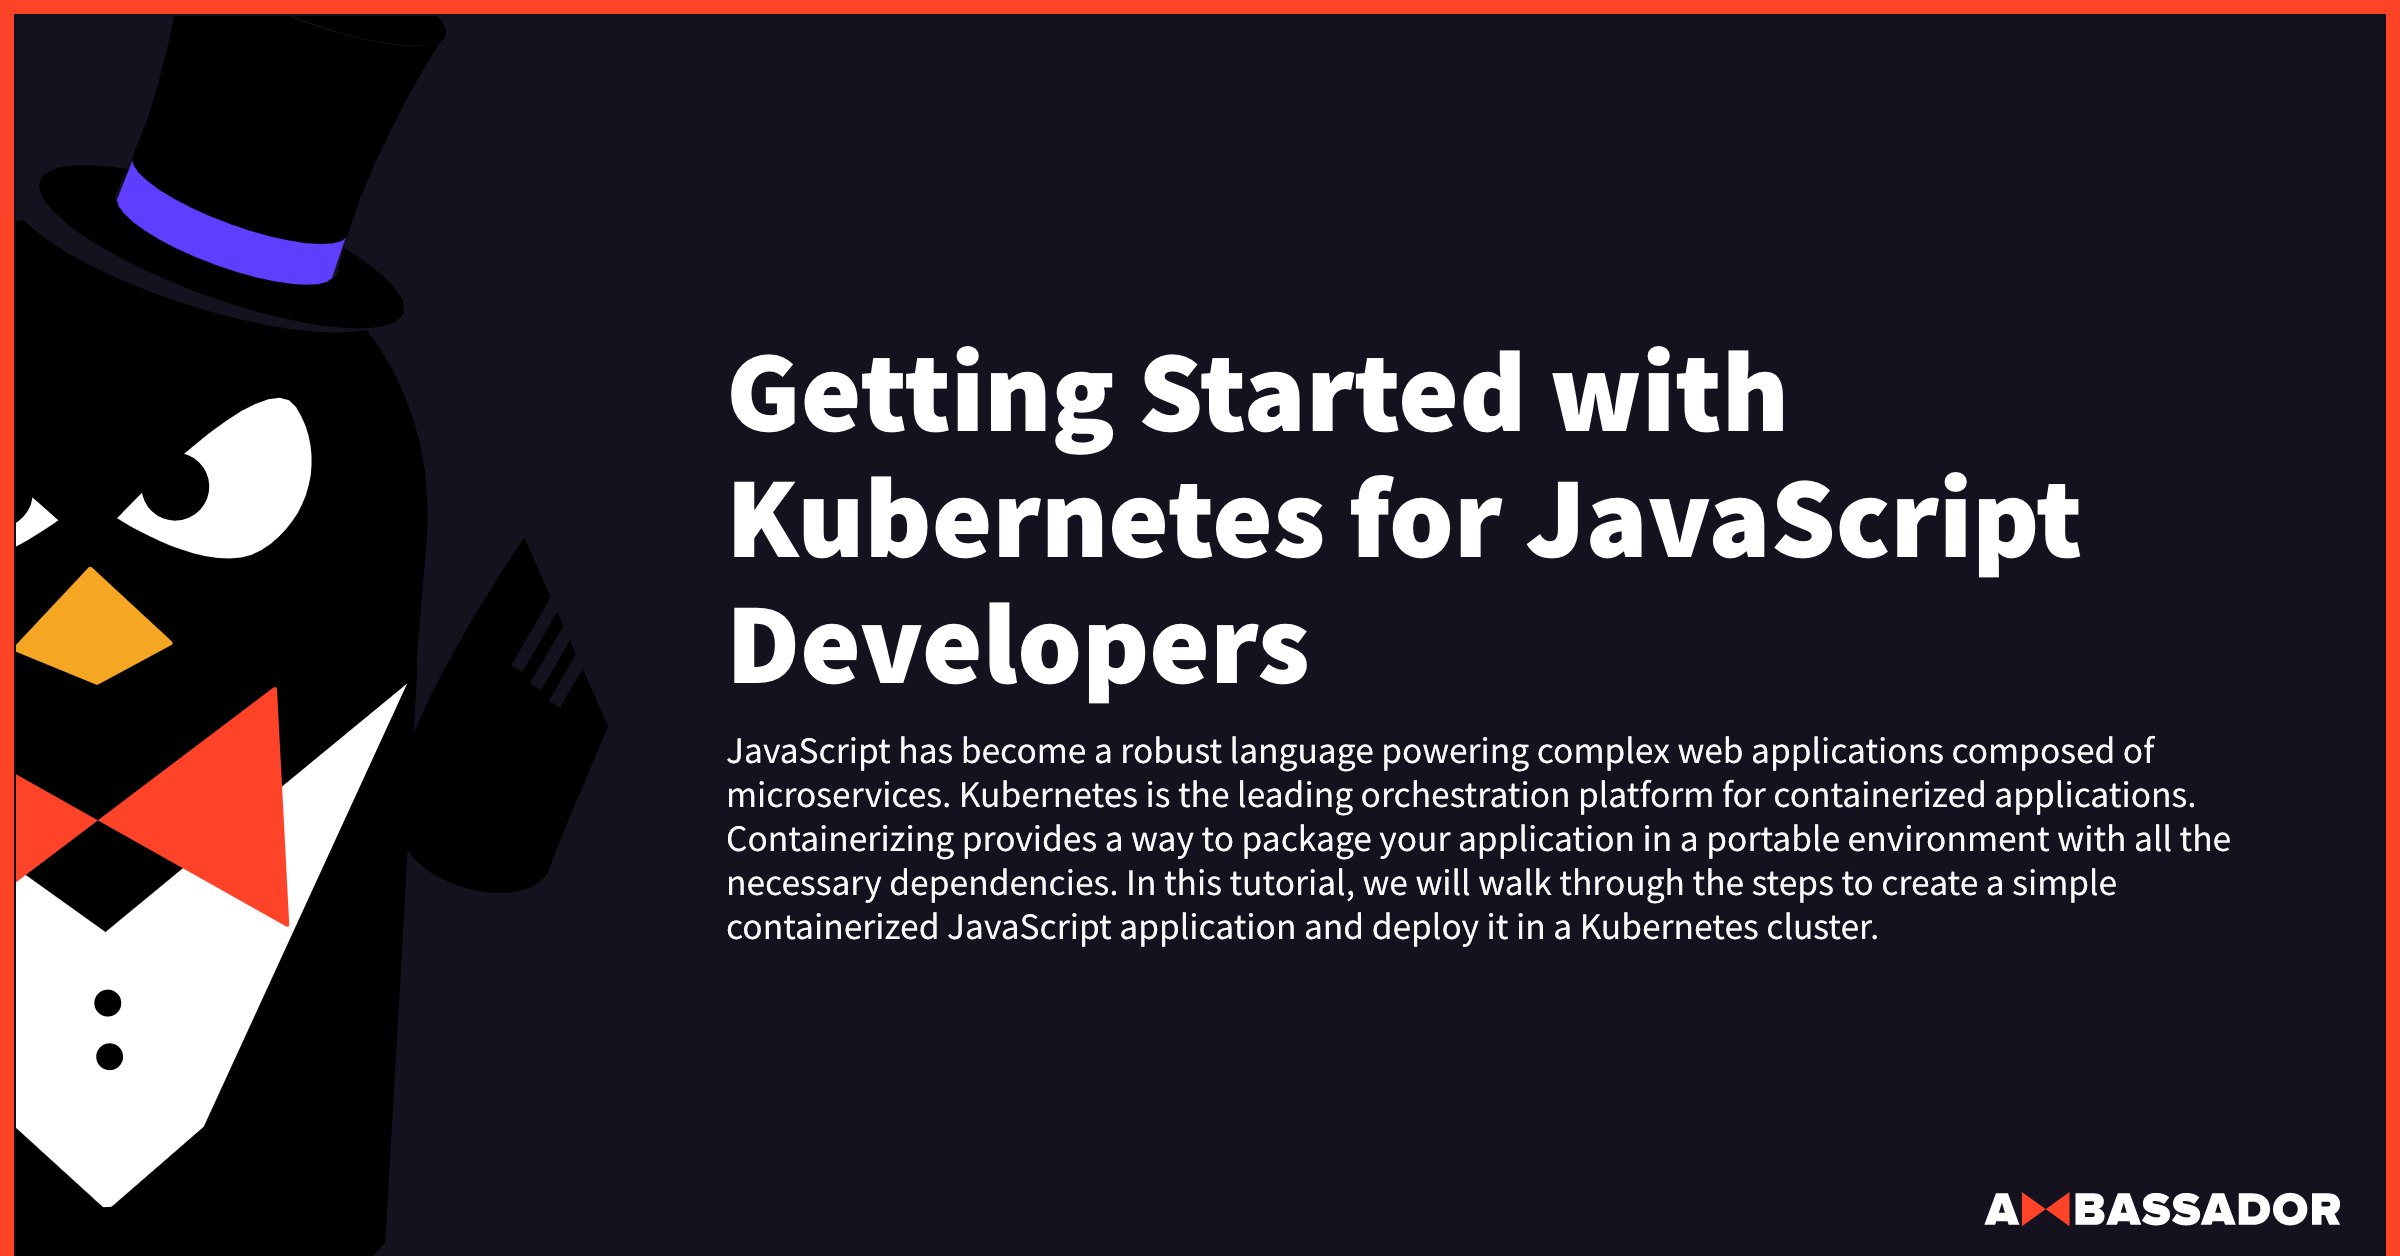 Thumbnail for resource: "Getting Started with Kubernetes for JavaScript Developers"